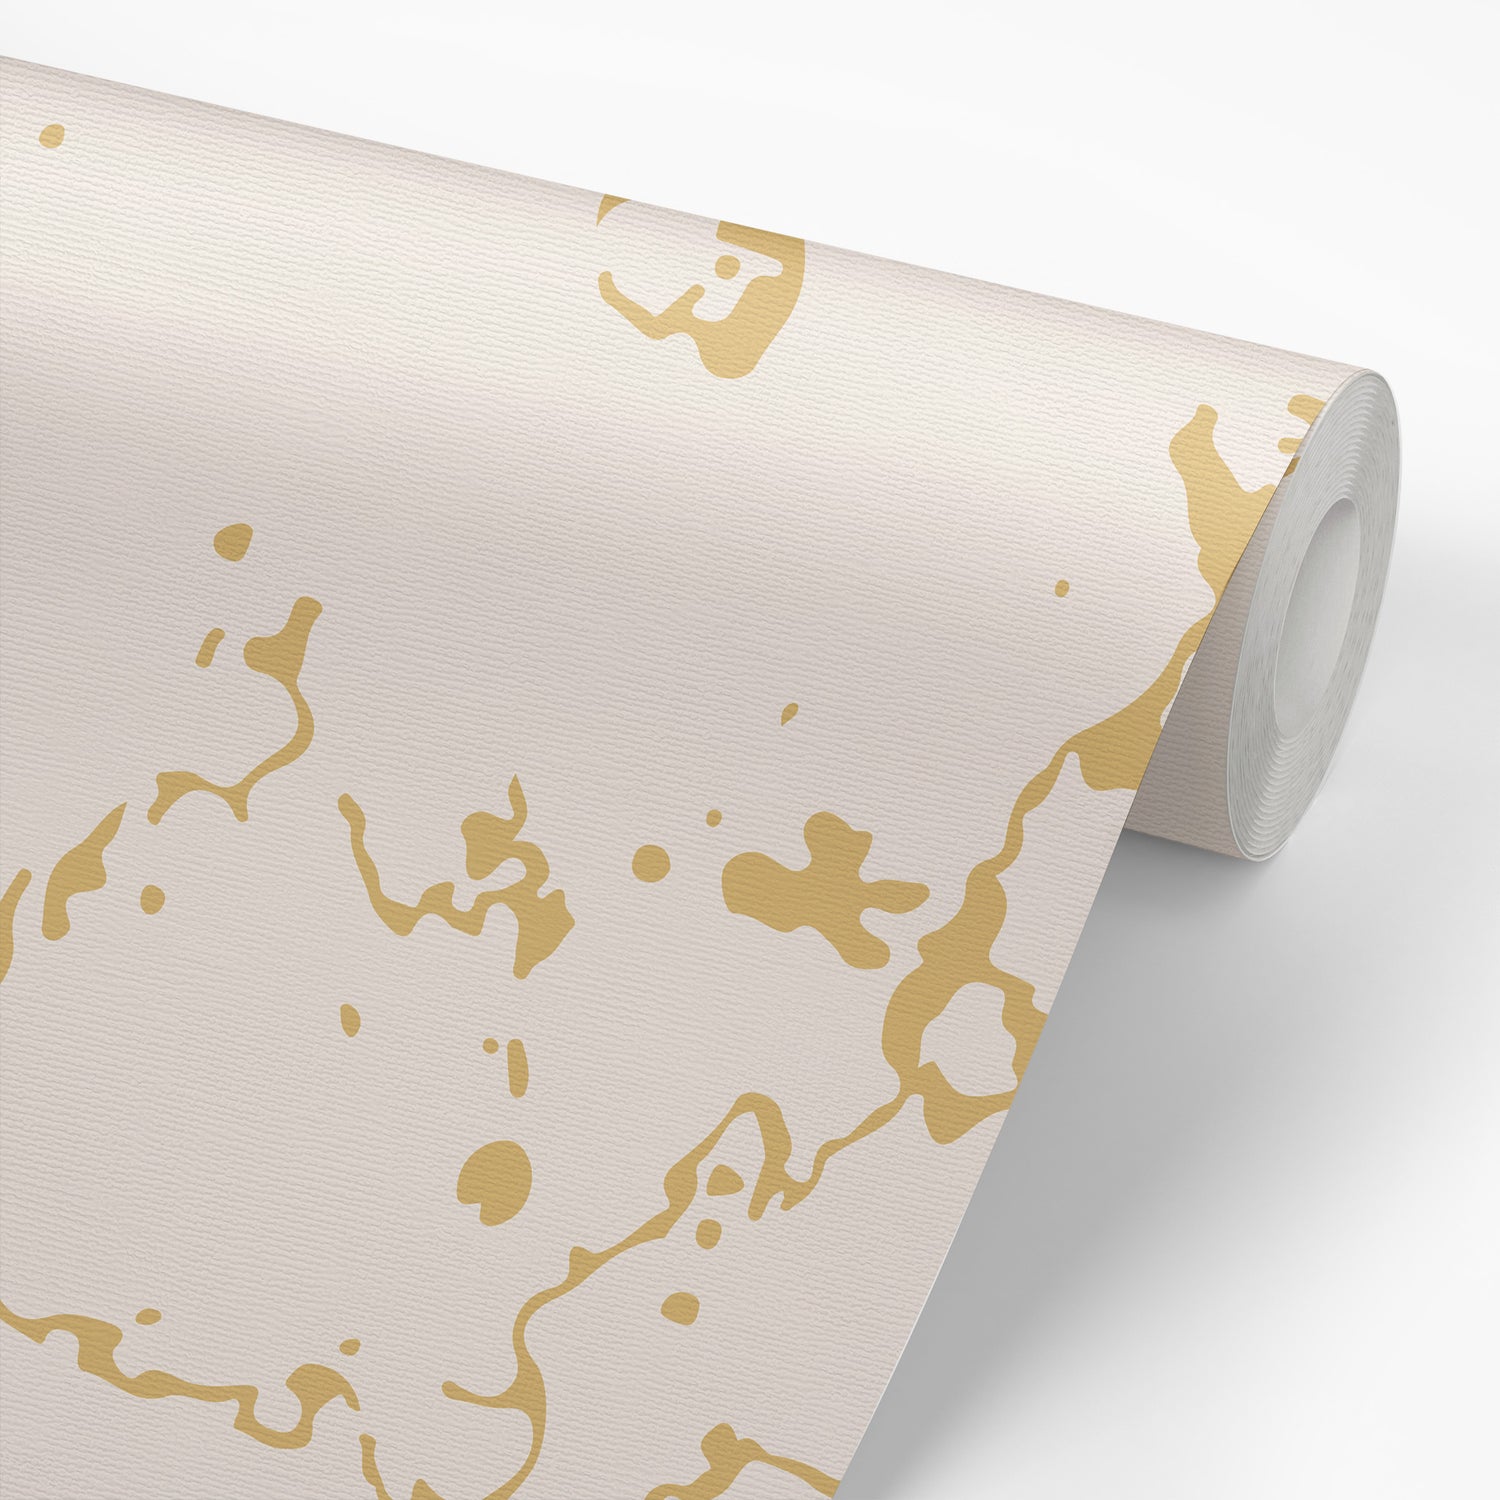 Cream Gold Marble Contact Paper Peel and Stick Wallpaper Removable